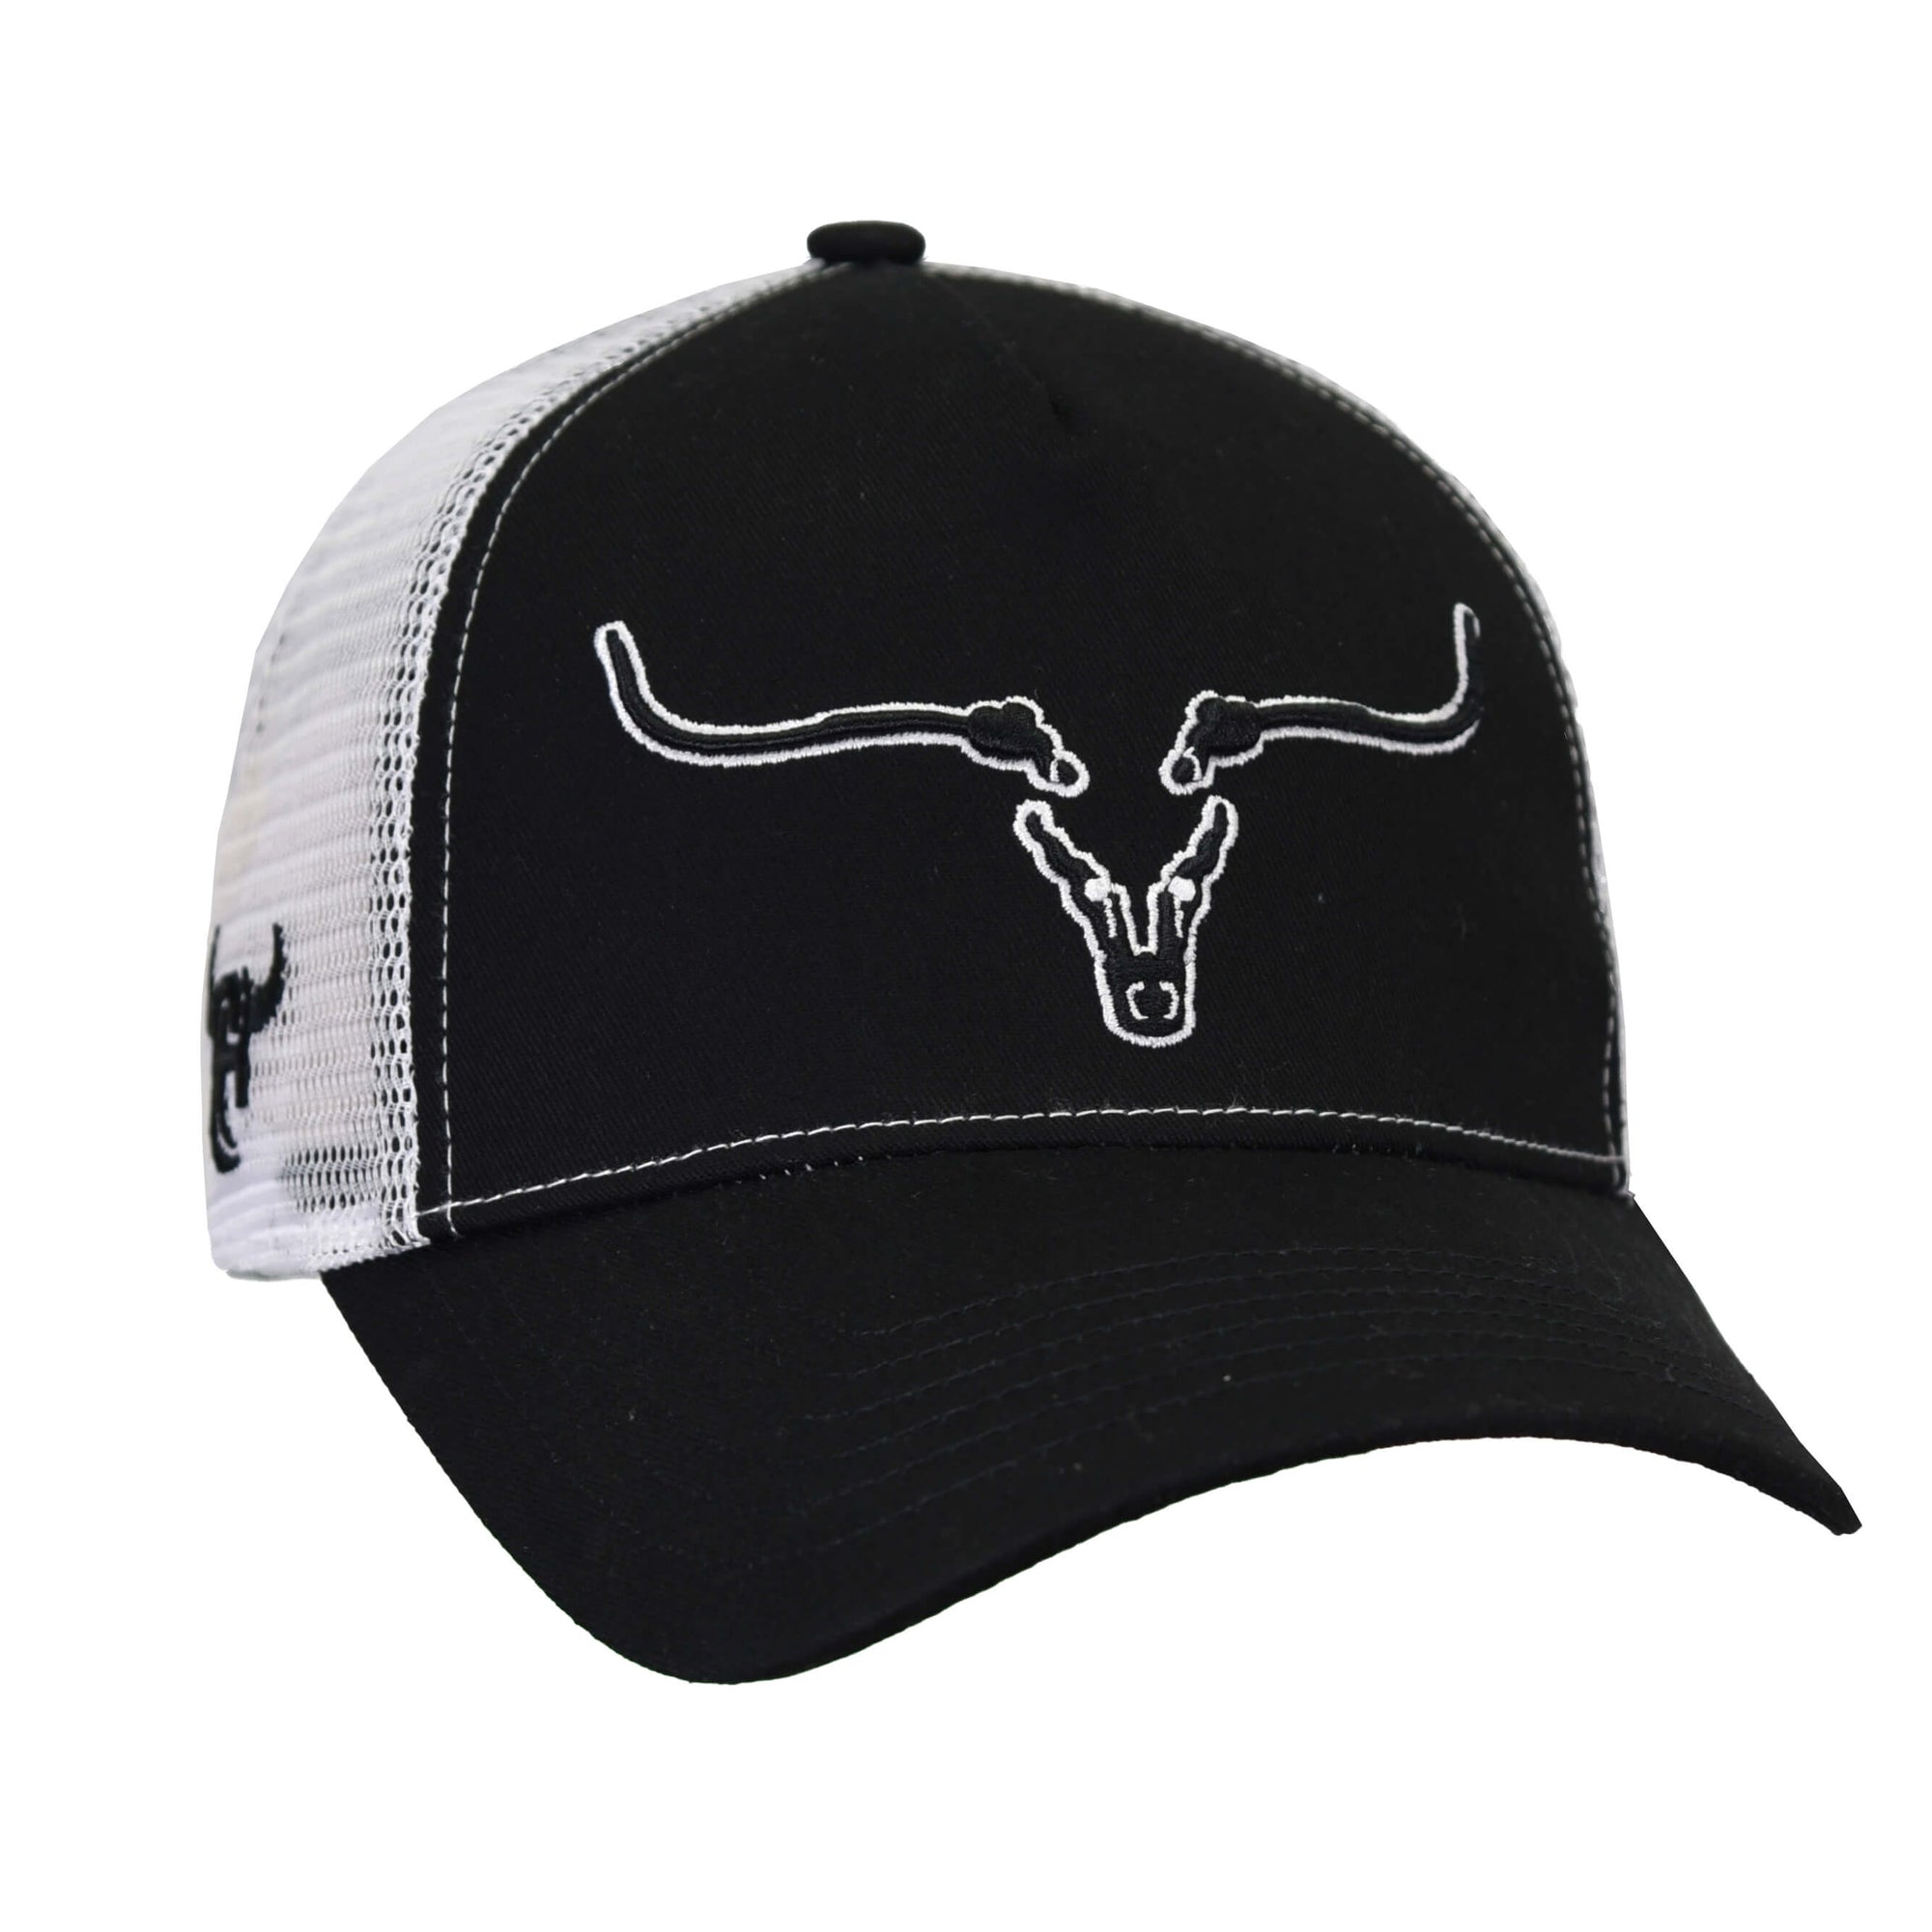 Men's Black and White 3D Ghost Steer Mesh 5 Panel Cap with Snap Back from Cowboy Hardware